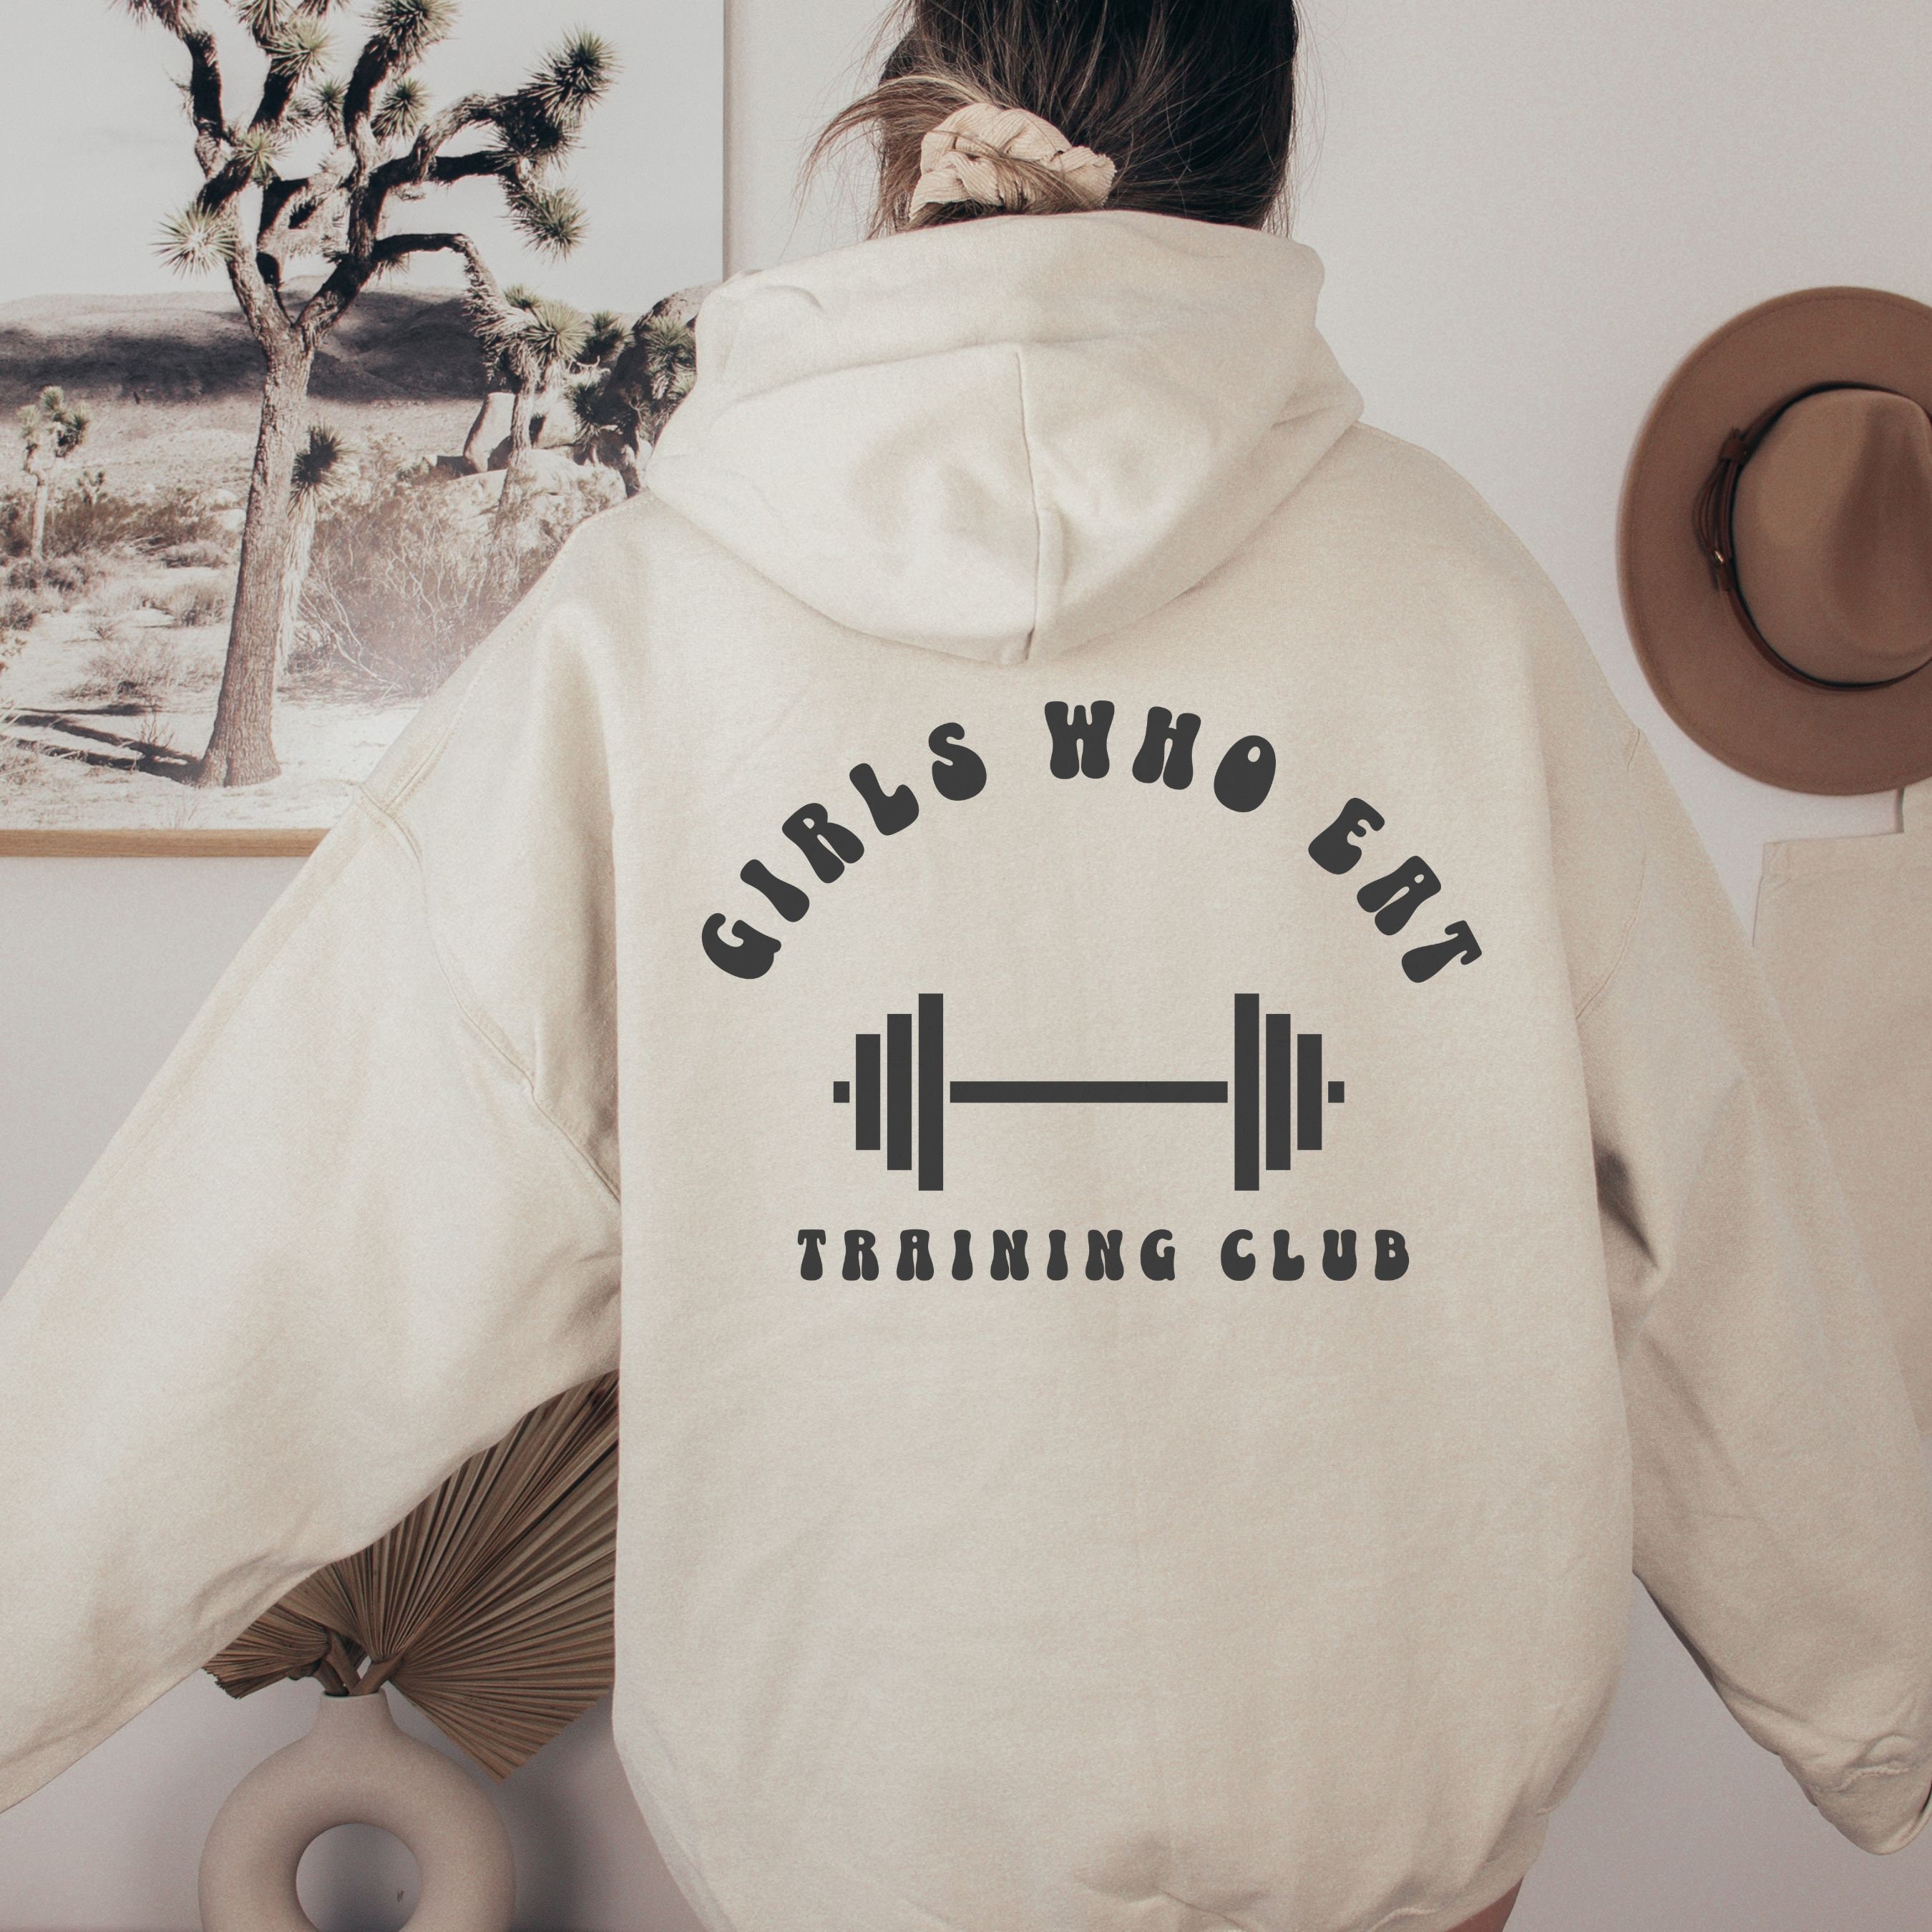 Sorry for My Resting Gym Face, Gym Pump Cover, Fall Workout Apparel, Gift  for Gym Lover, Cute Gym Gift, Funny Gym Hoodie, Workout Gift 